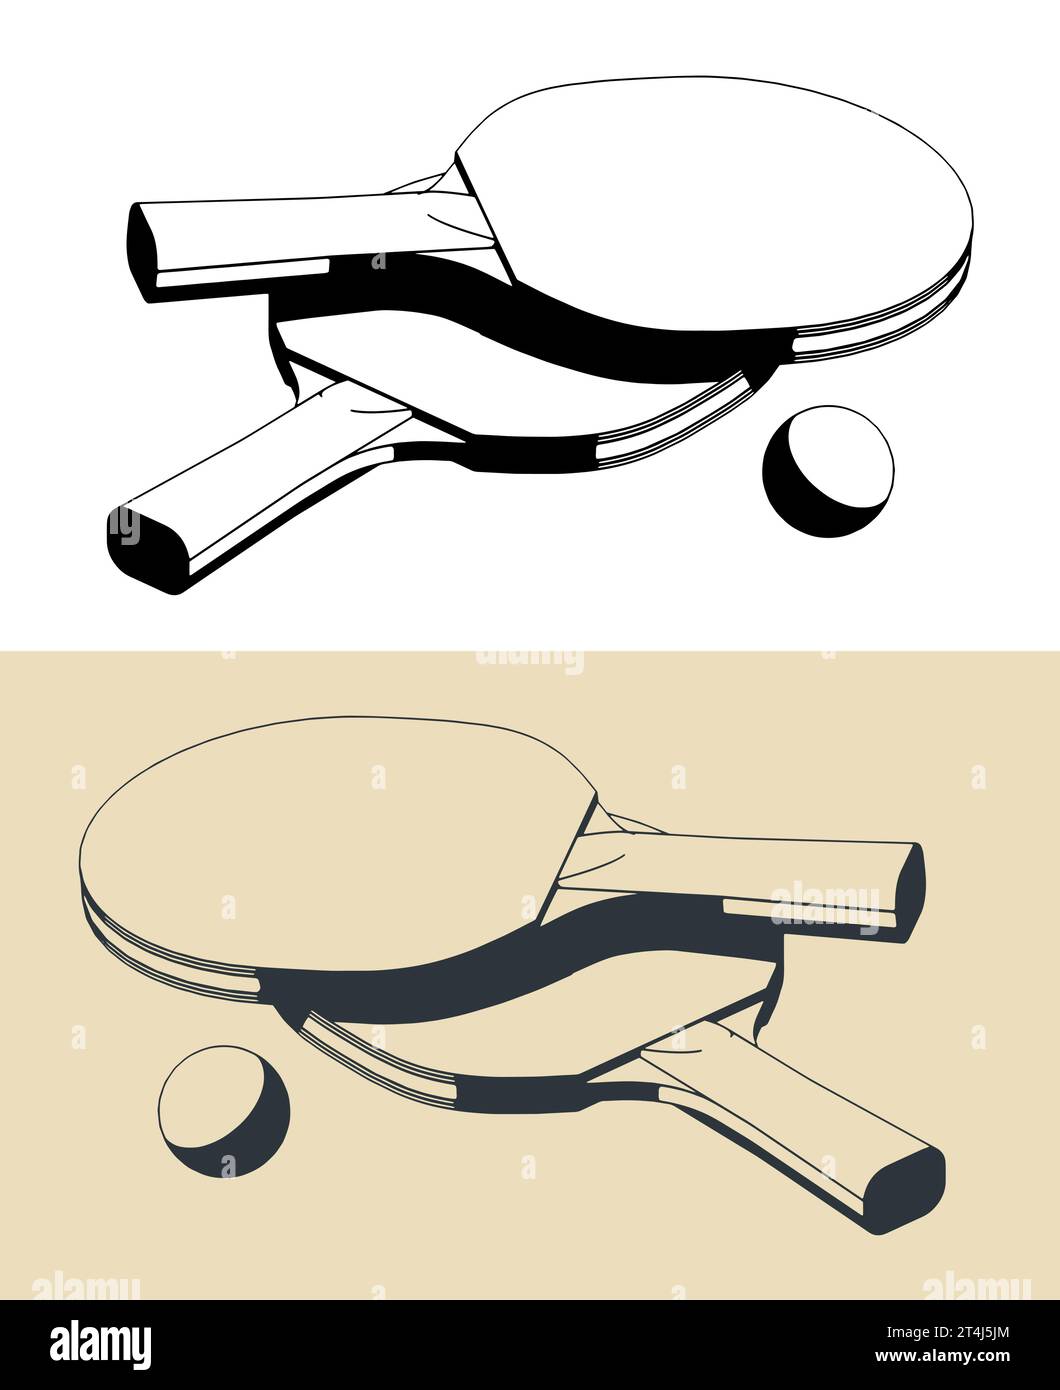 Stylized vector illustrations of rackets and ball for table tennis Stock Vector